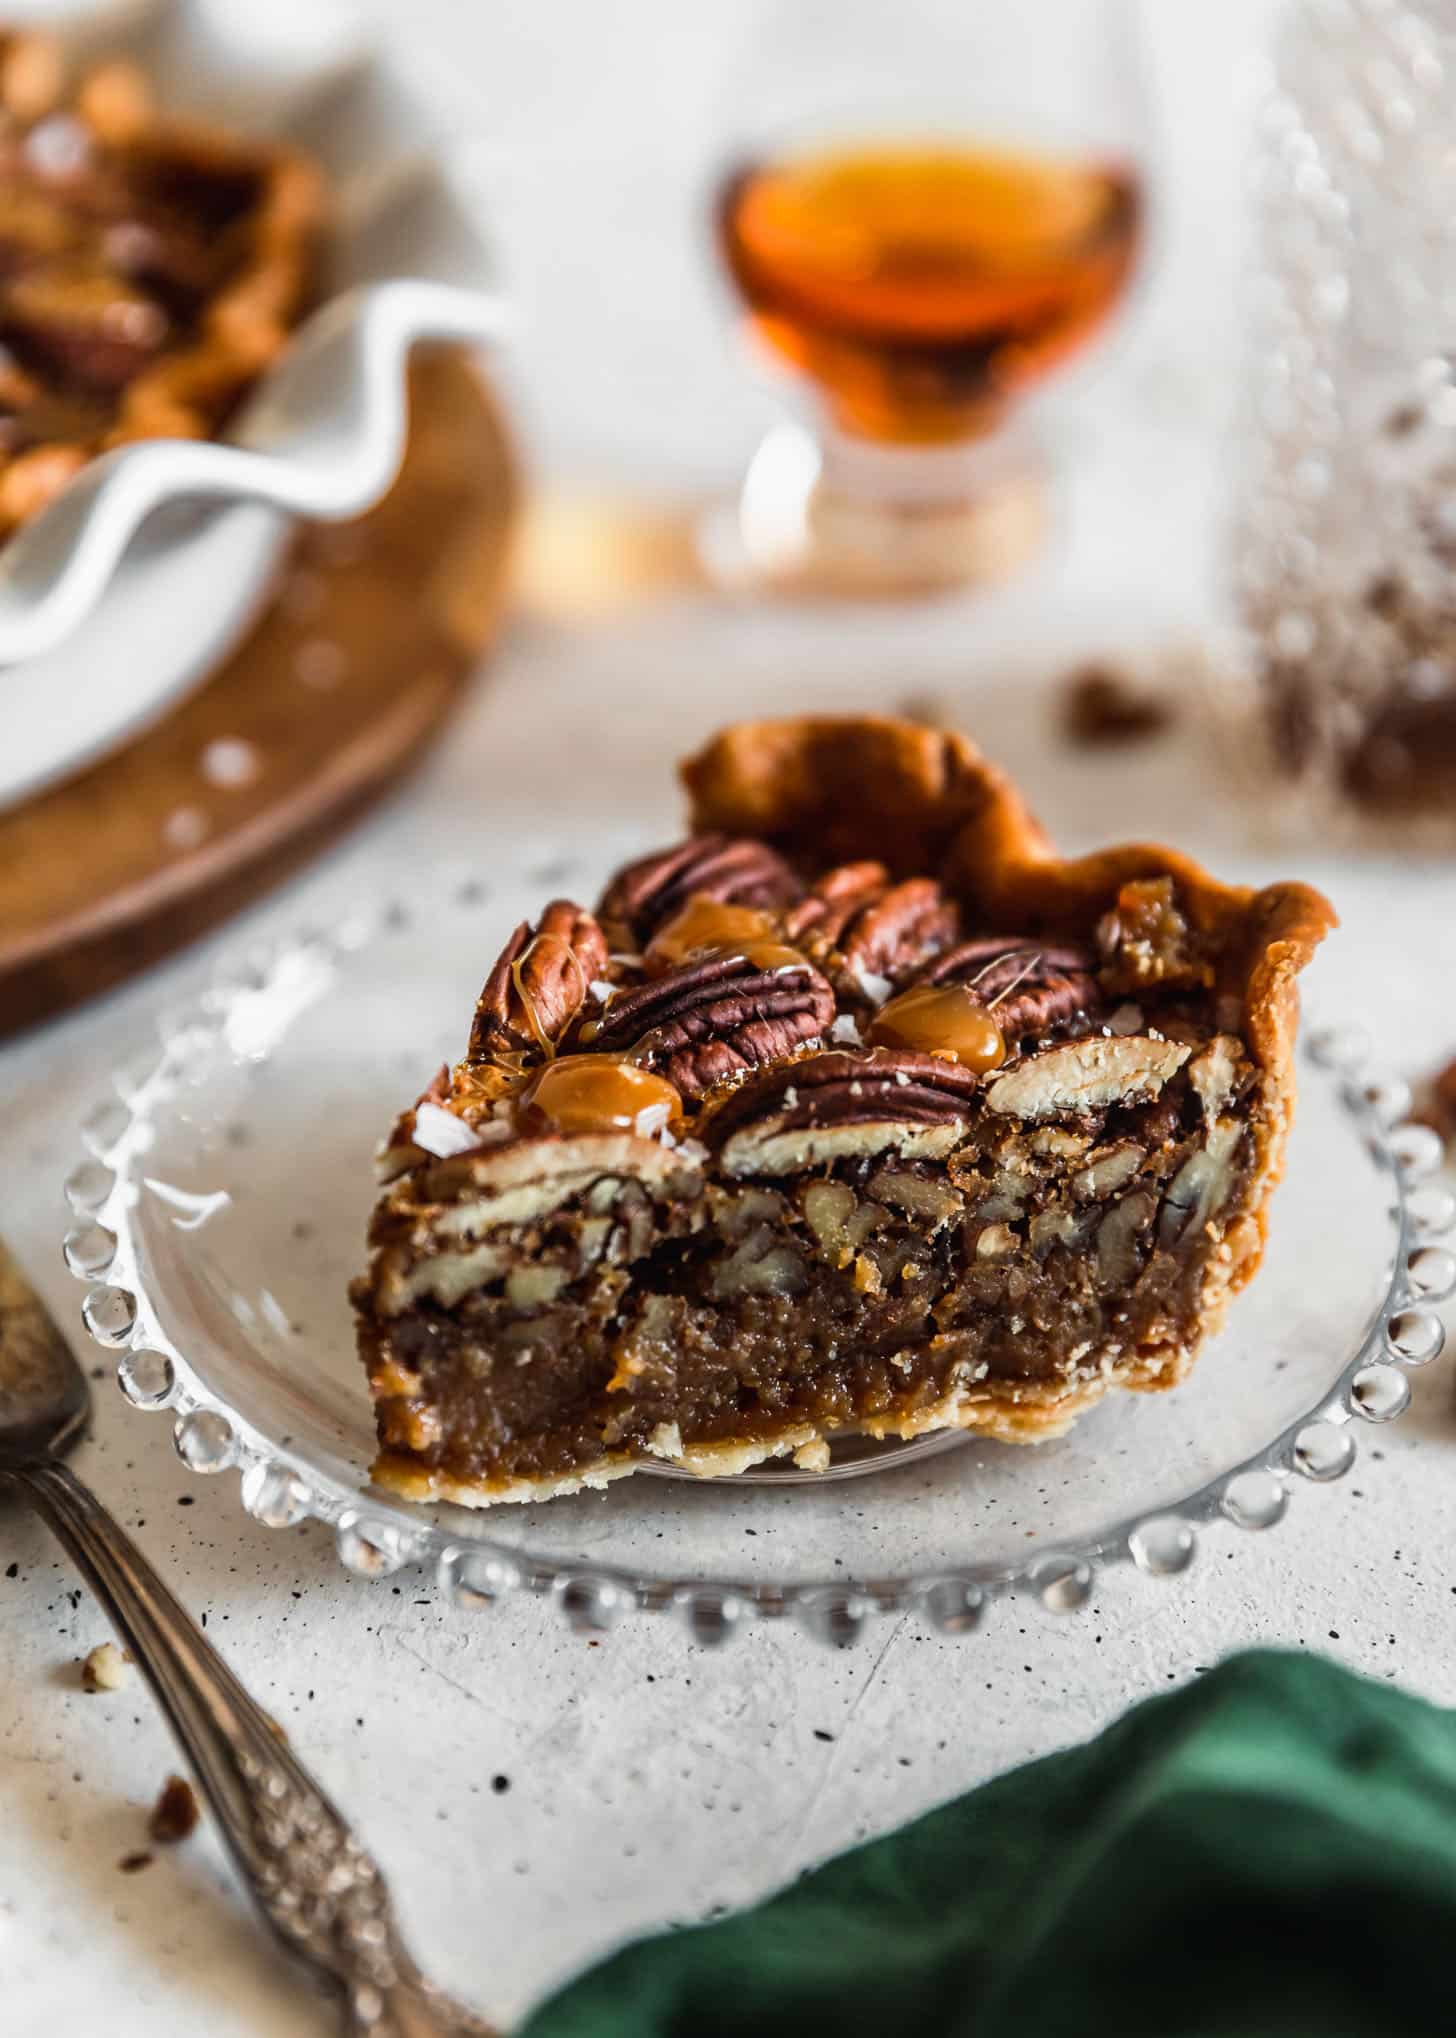 A slice of bourbon caramel pecan pie on a white table next to bourbon, a pie plate, and a green linen.